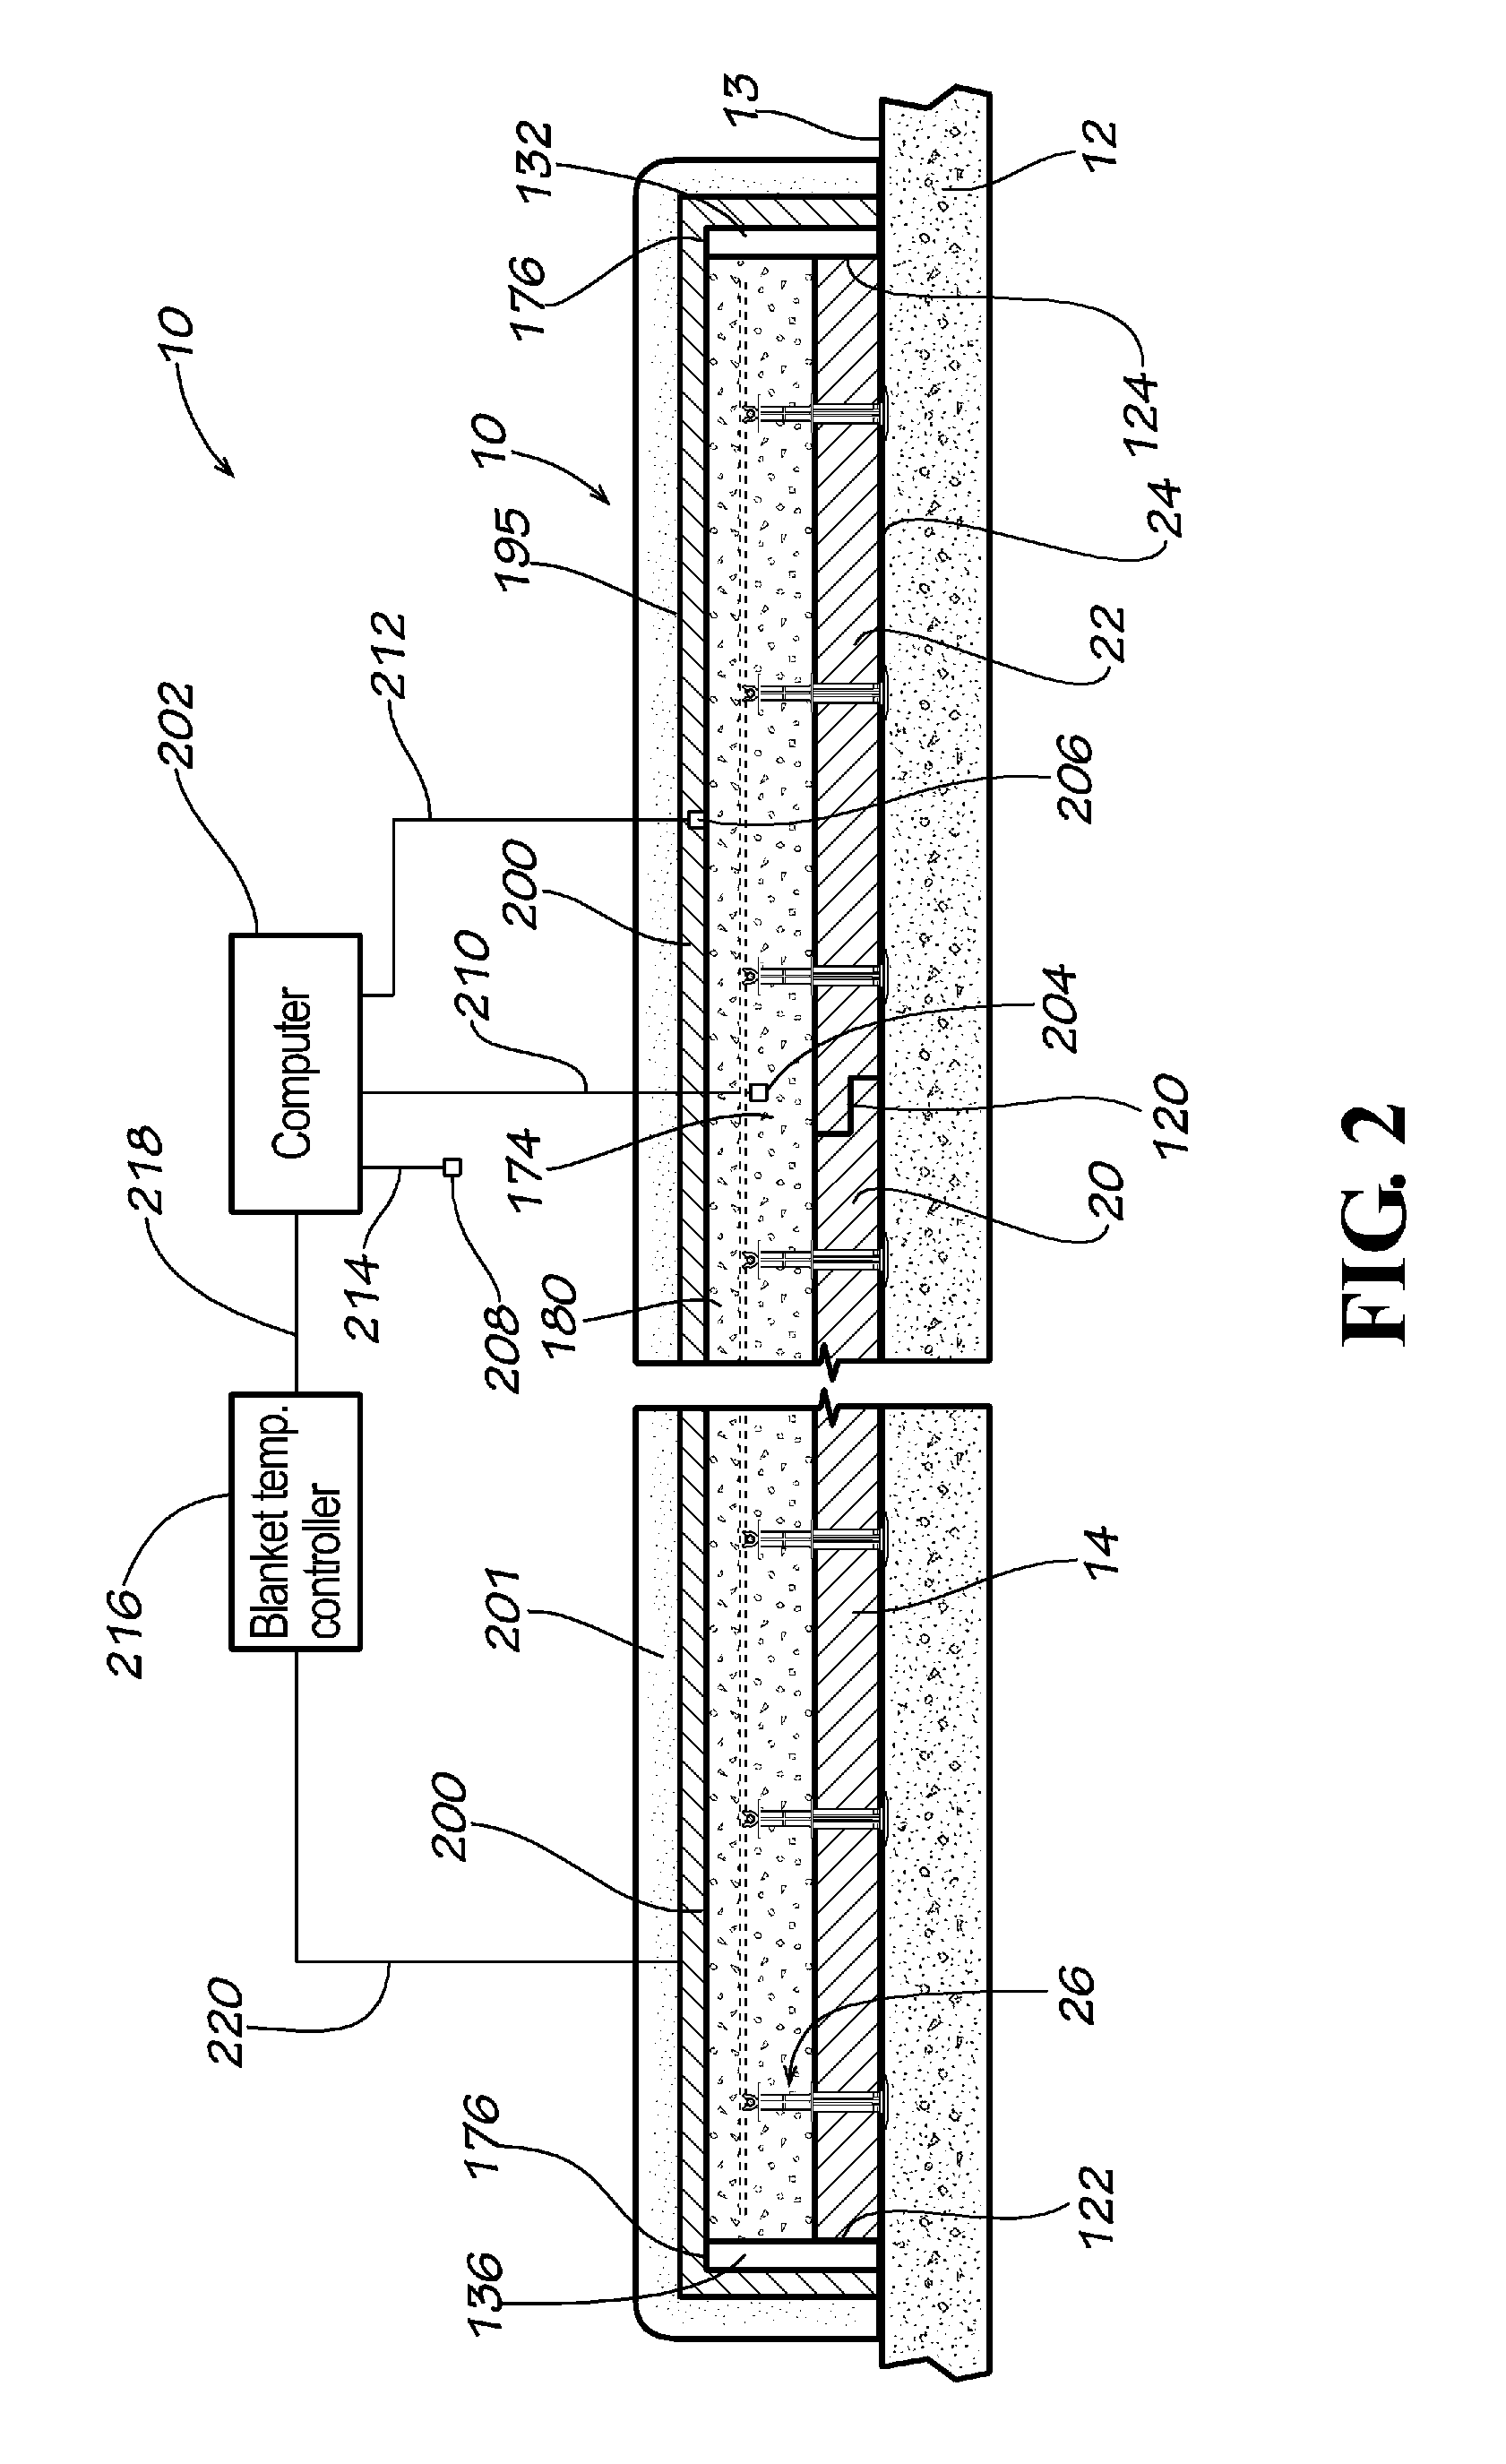 Method for electronic temperature controlled curing of concrete and accelerating concrete maturity or equivalent age of concrete structures and objects